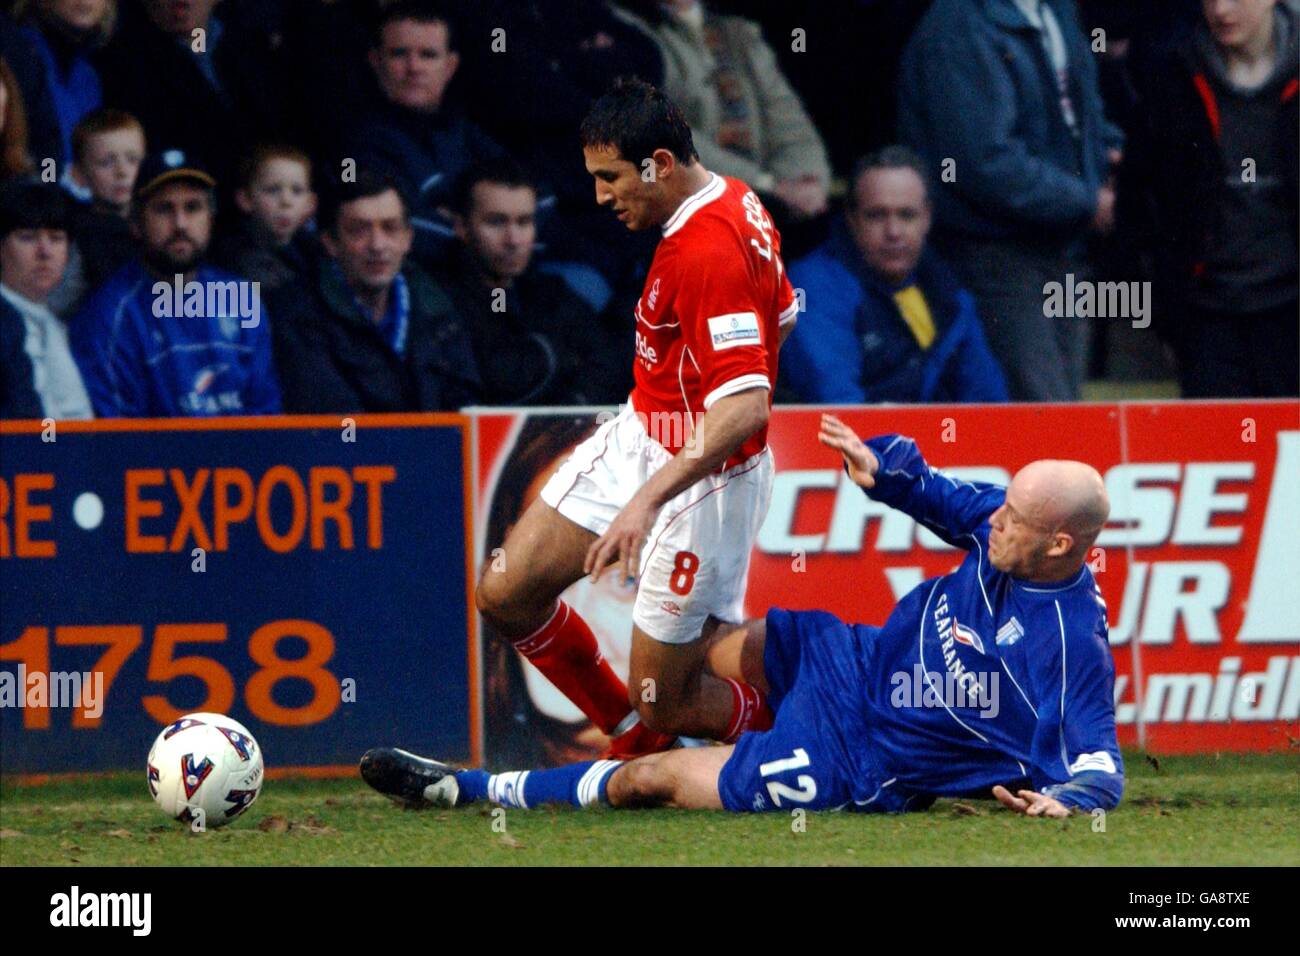 Soccer - Nationwide League Division One - Gillingham v Nottingham Forest. Nottingham Forest's Jack Lester is tackled by Gillingham's Paul Shaw Stock Photo